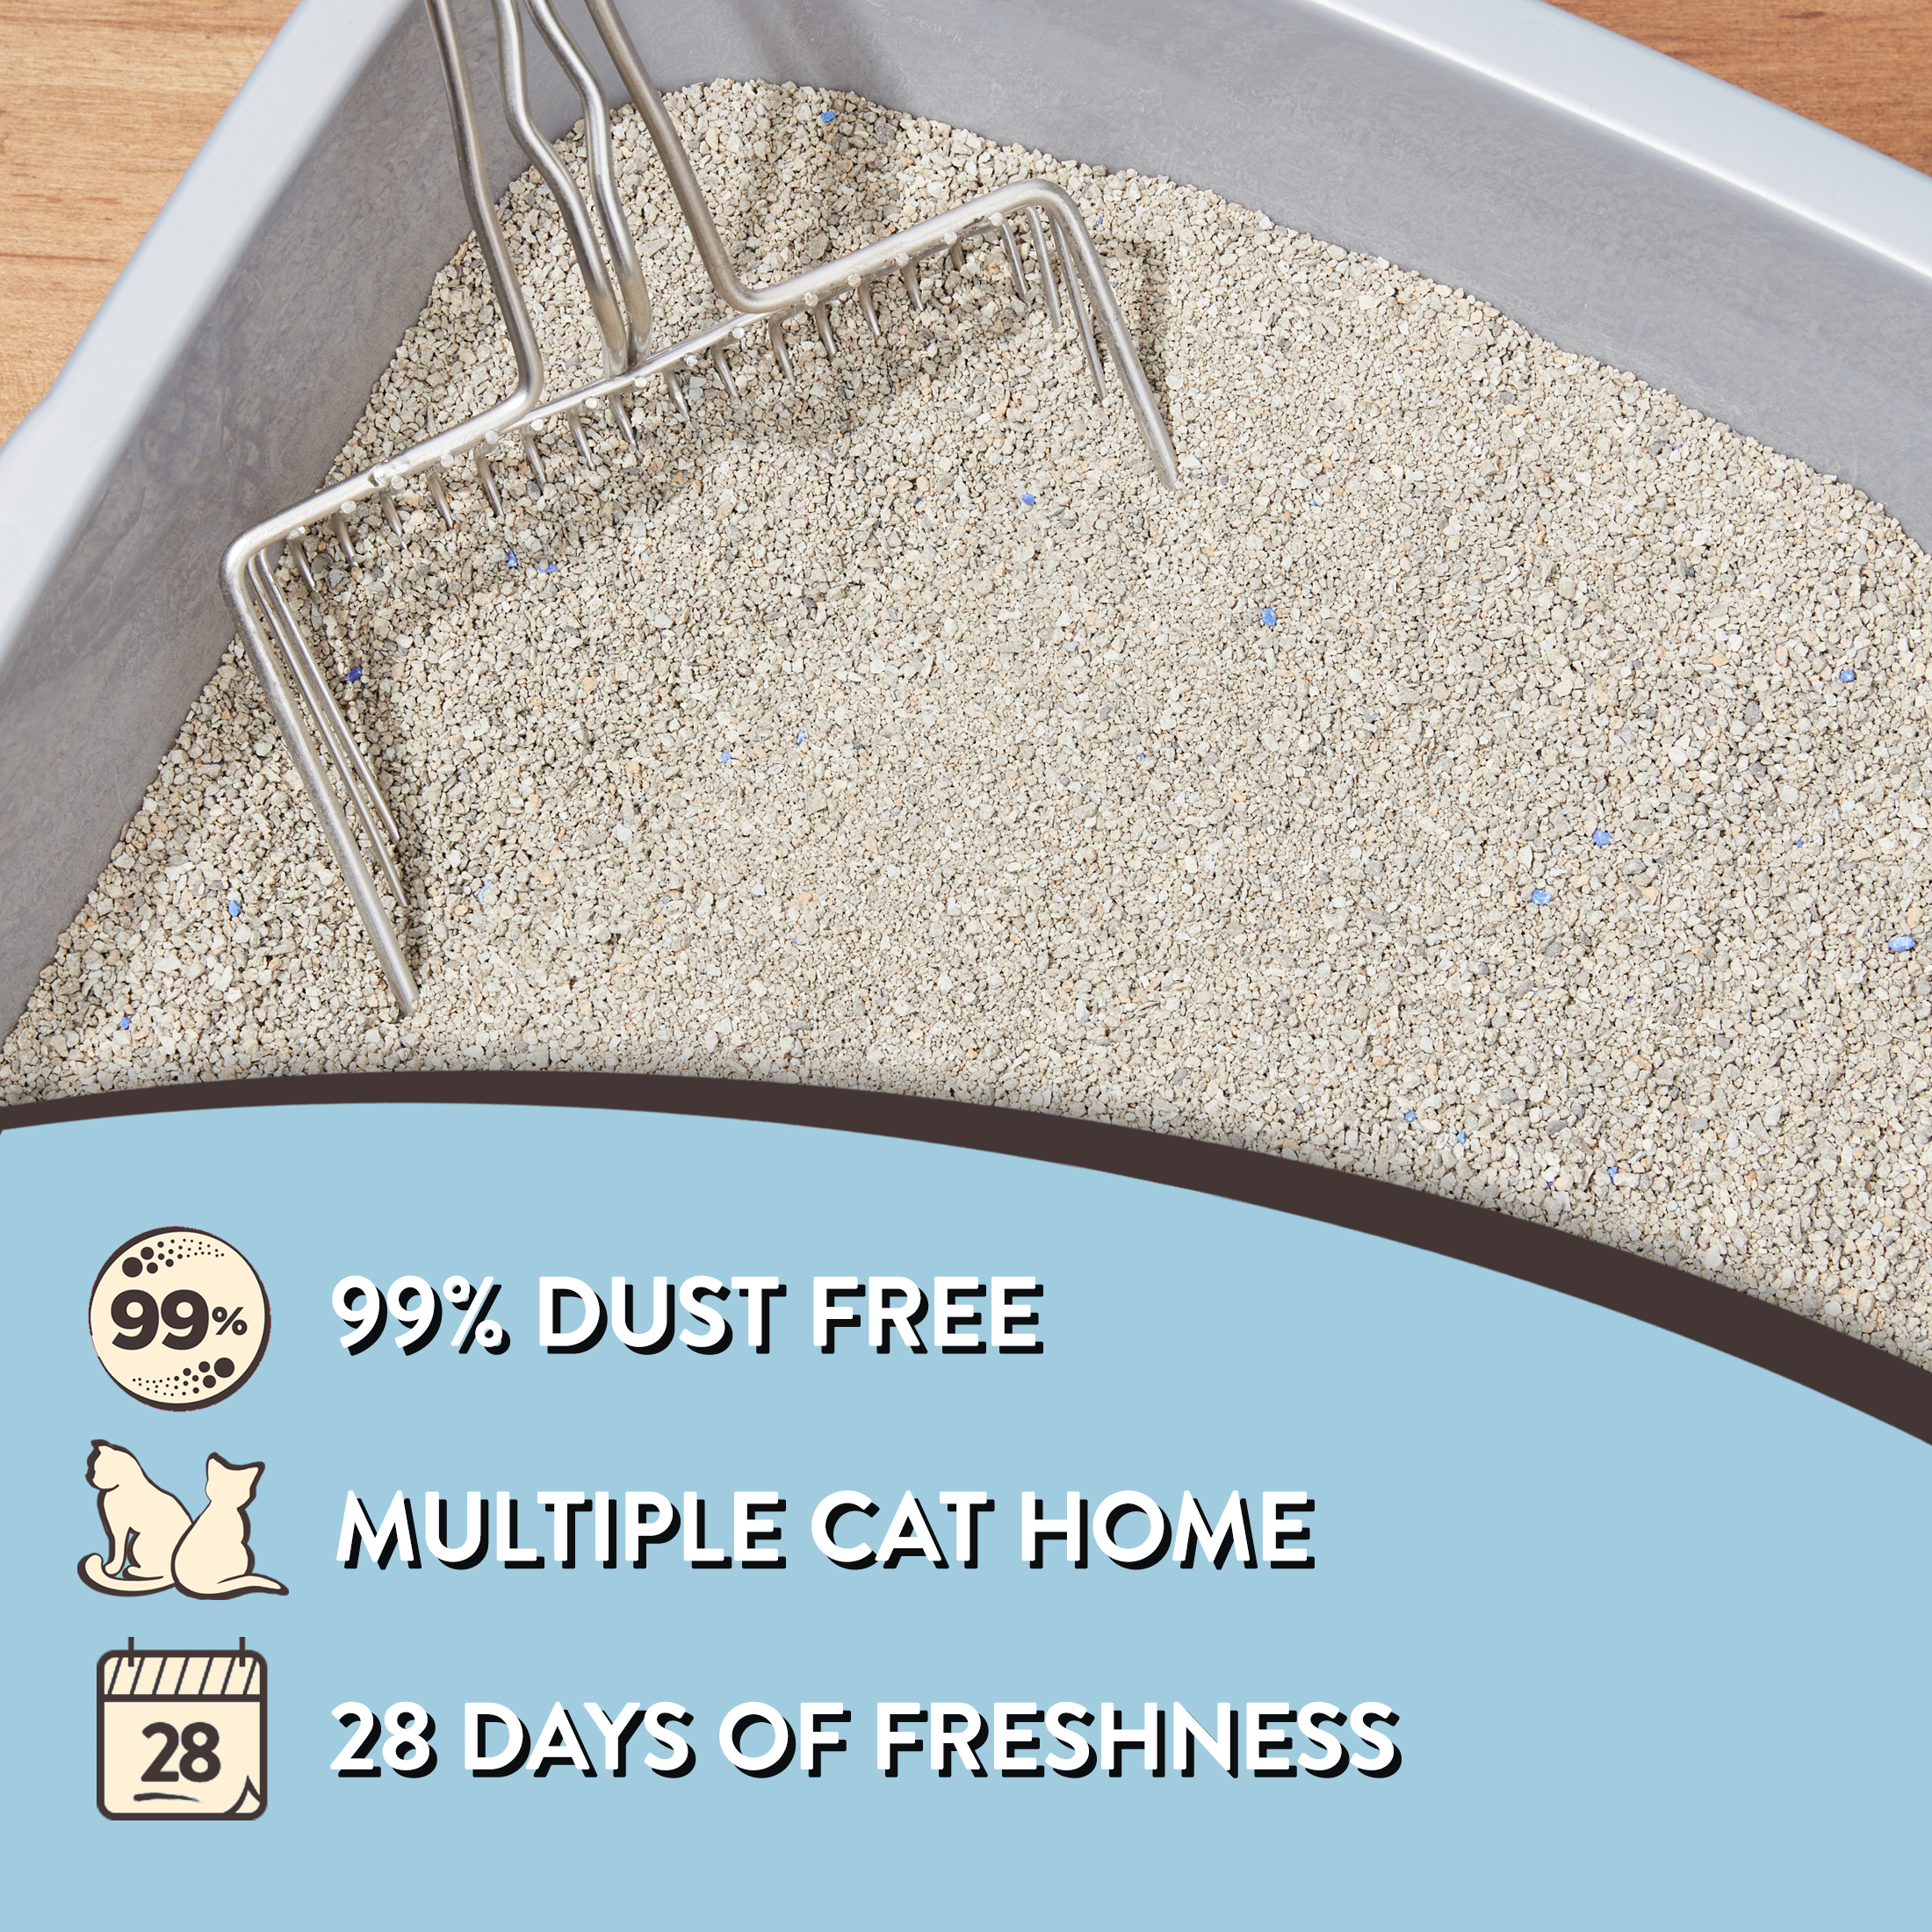 Special Kitty Lightweight & Scoopable Clumping Cat Litter, Fresh Scent, 8.5 lb - image 4 of 7